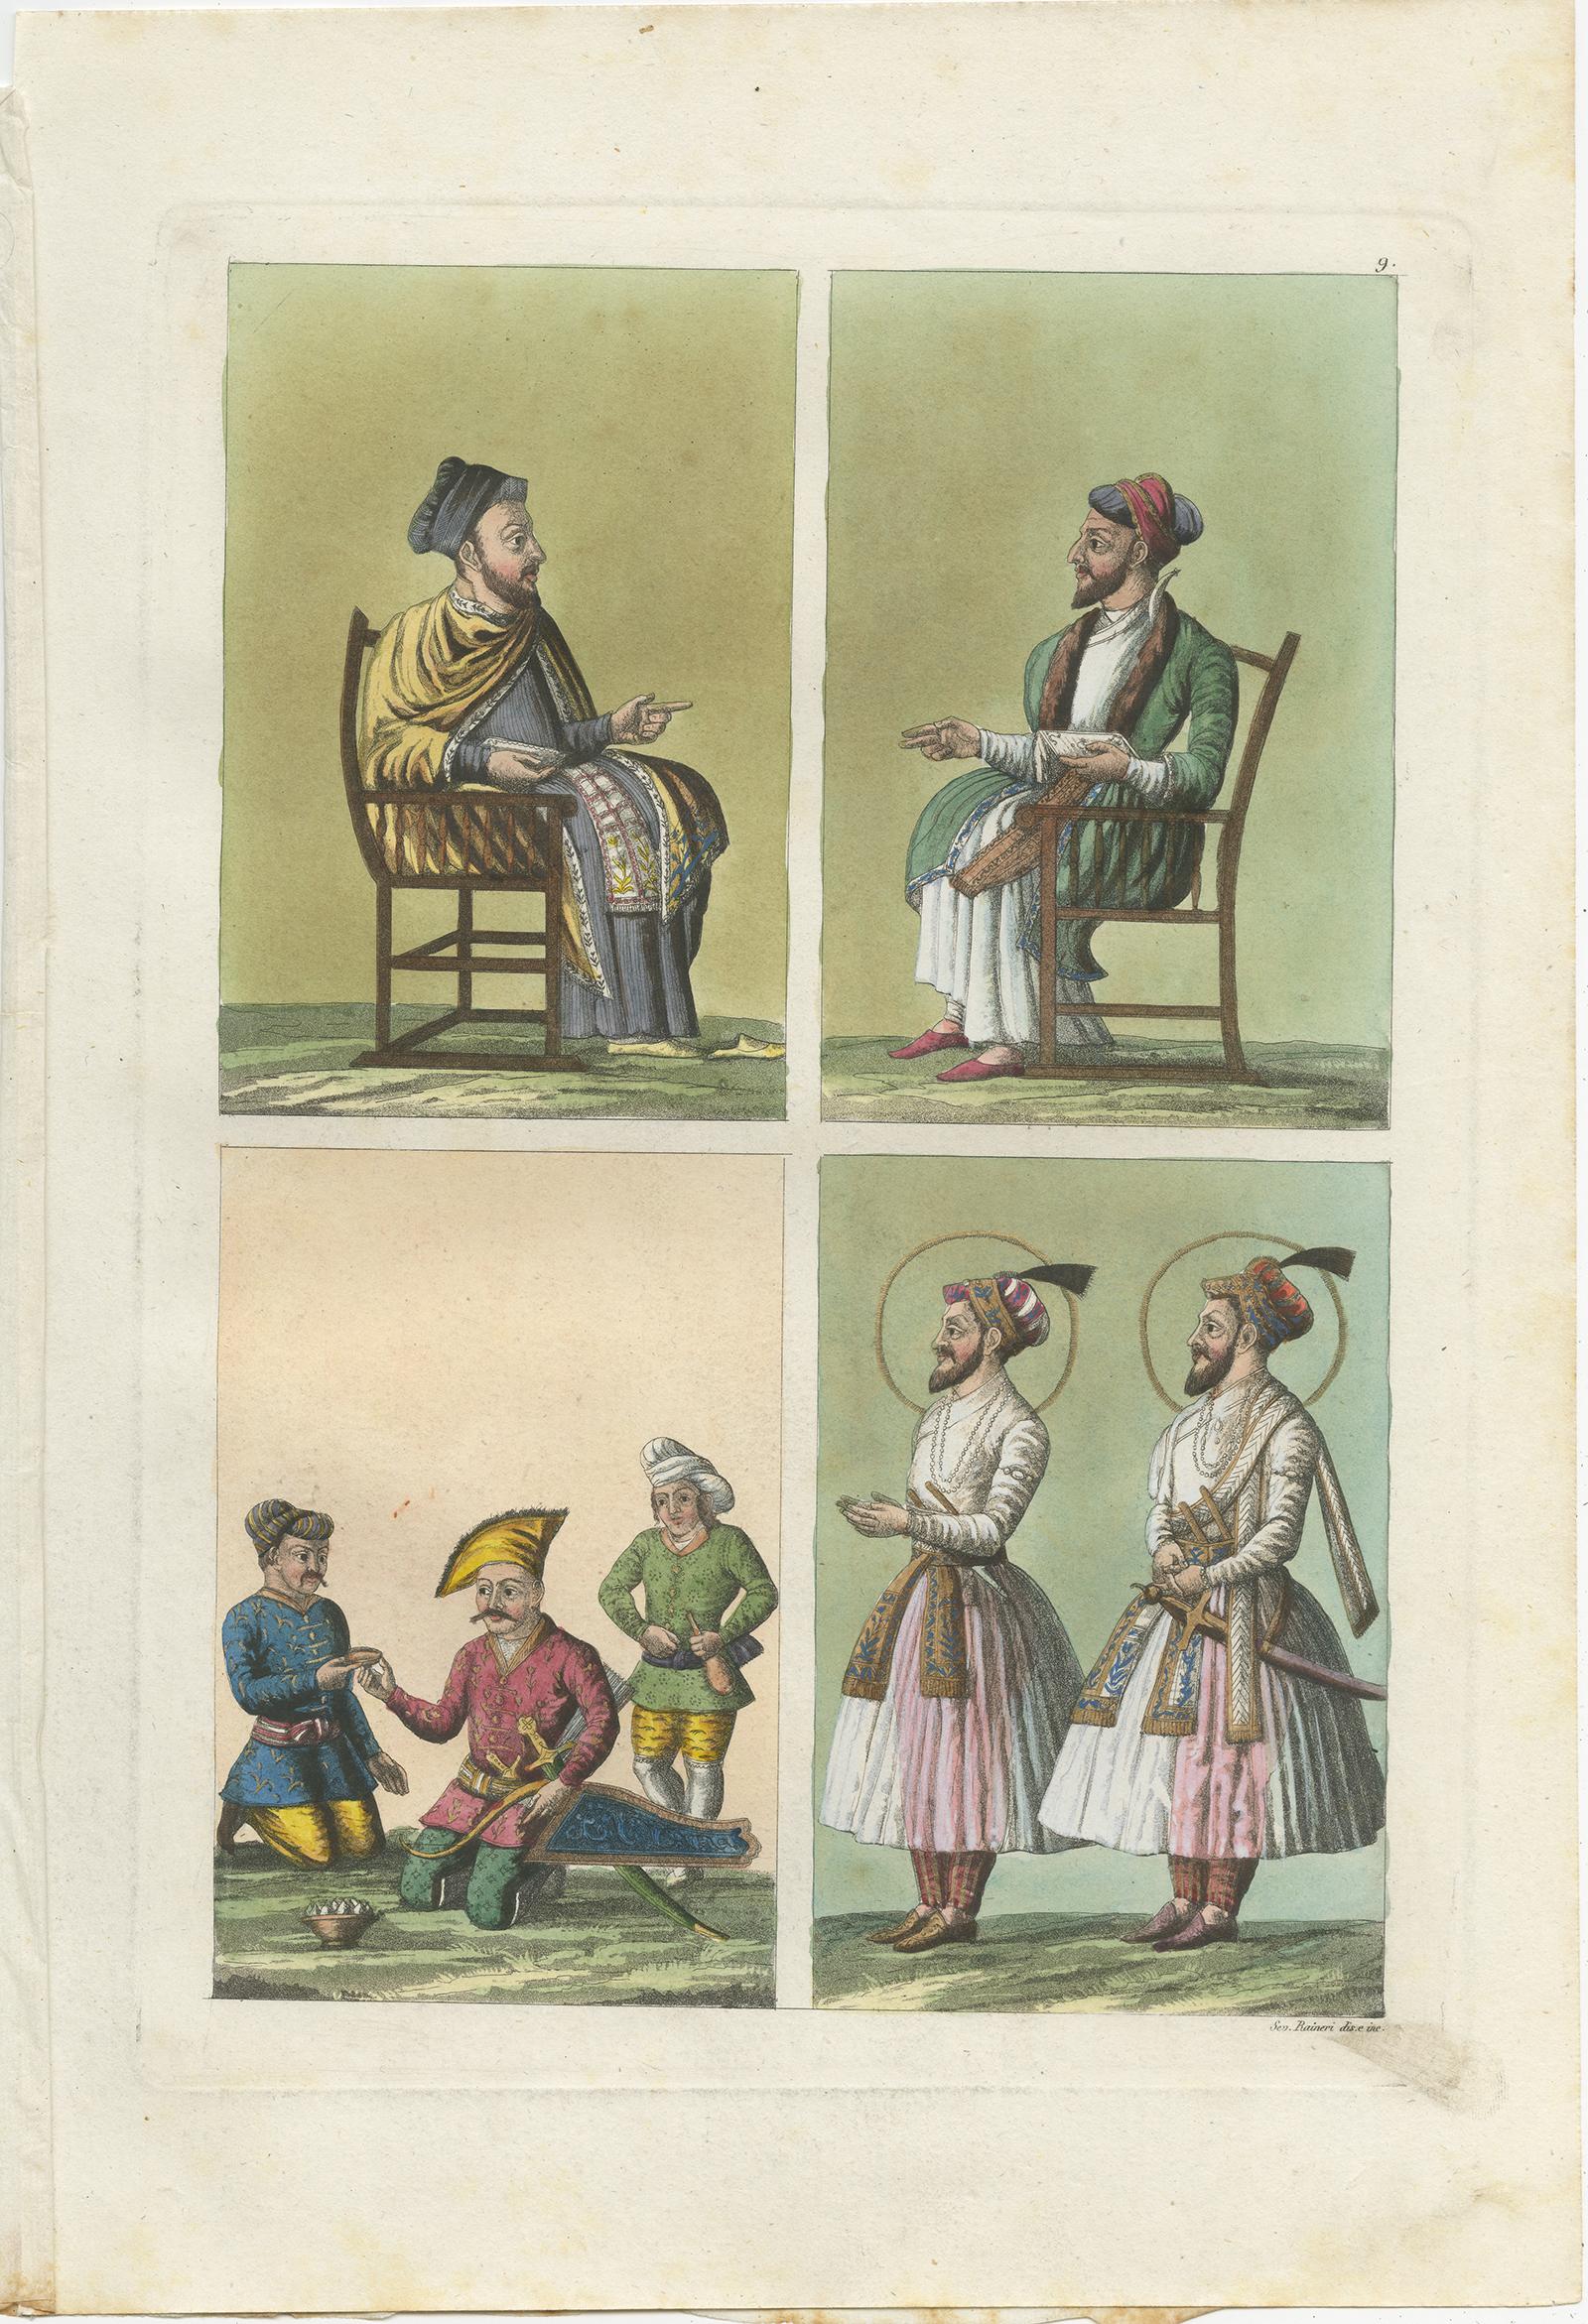 Paper Set of 5 Antique Prints with Hindustan Miniatures by Ferrario '1831' For Sale